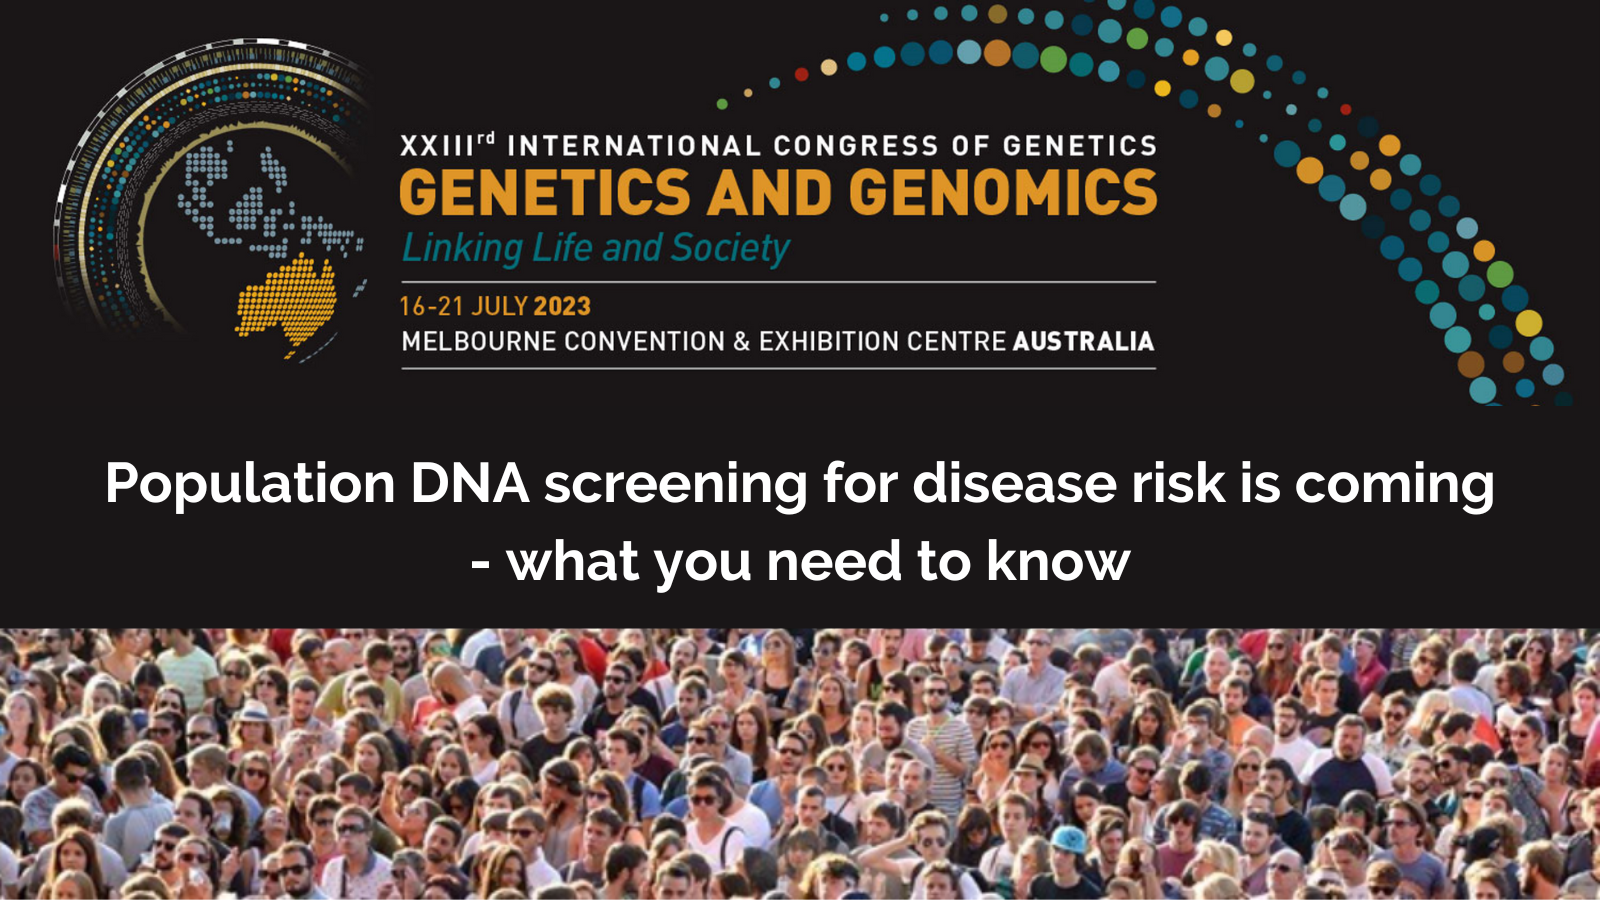 Population DNA screening for disease risk is coming - what you need to know. Public event on 20 July.